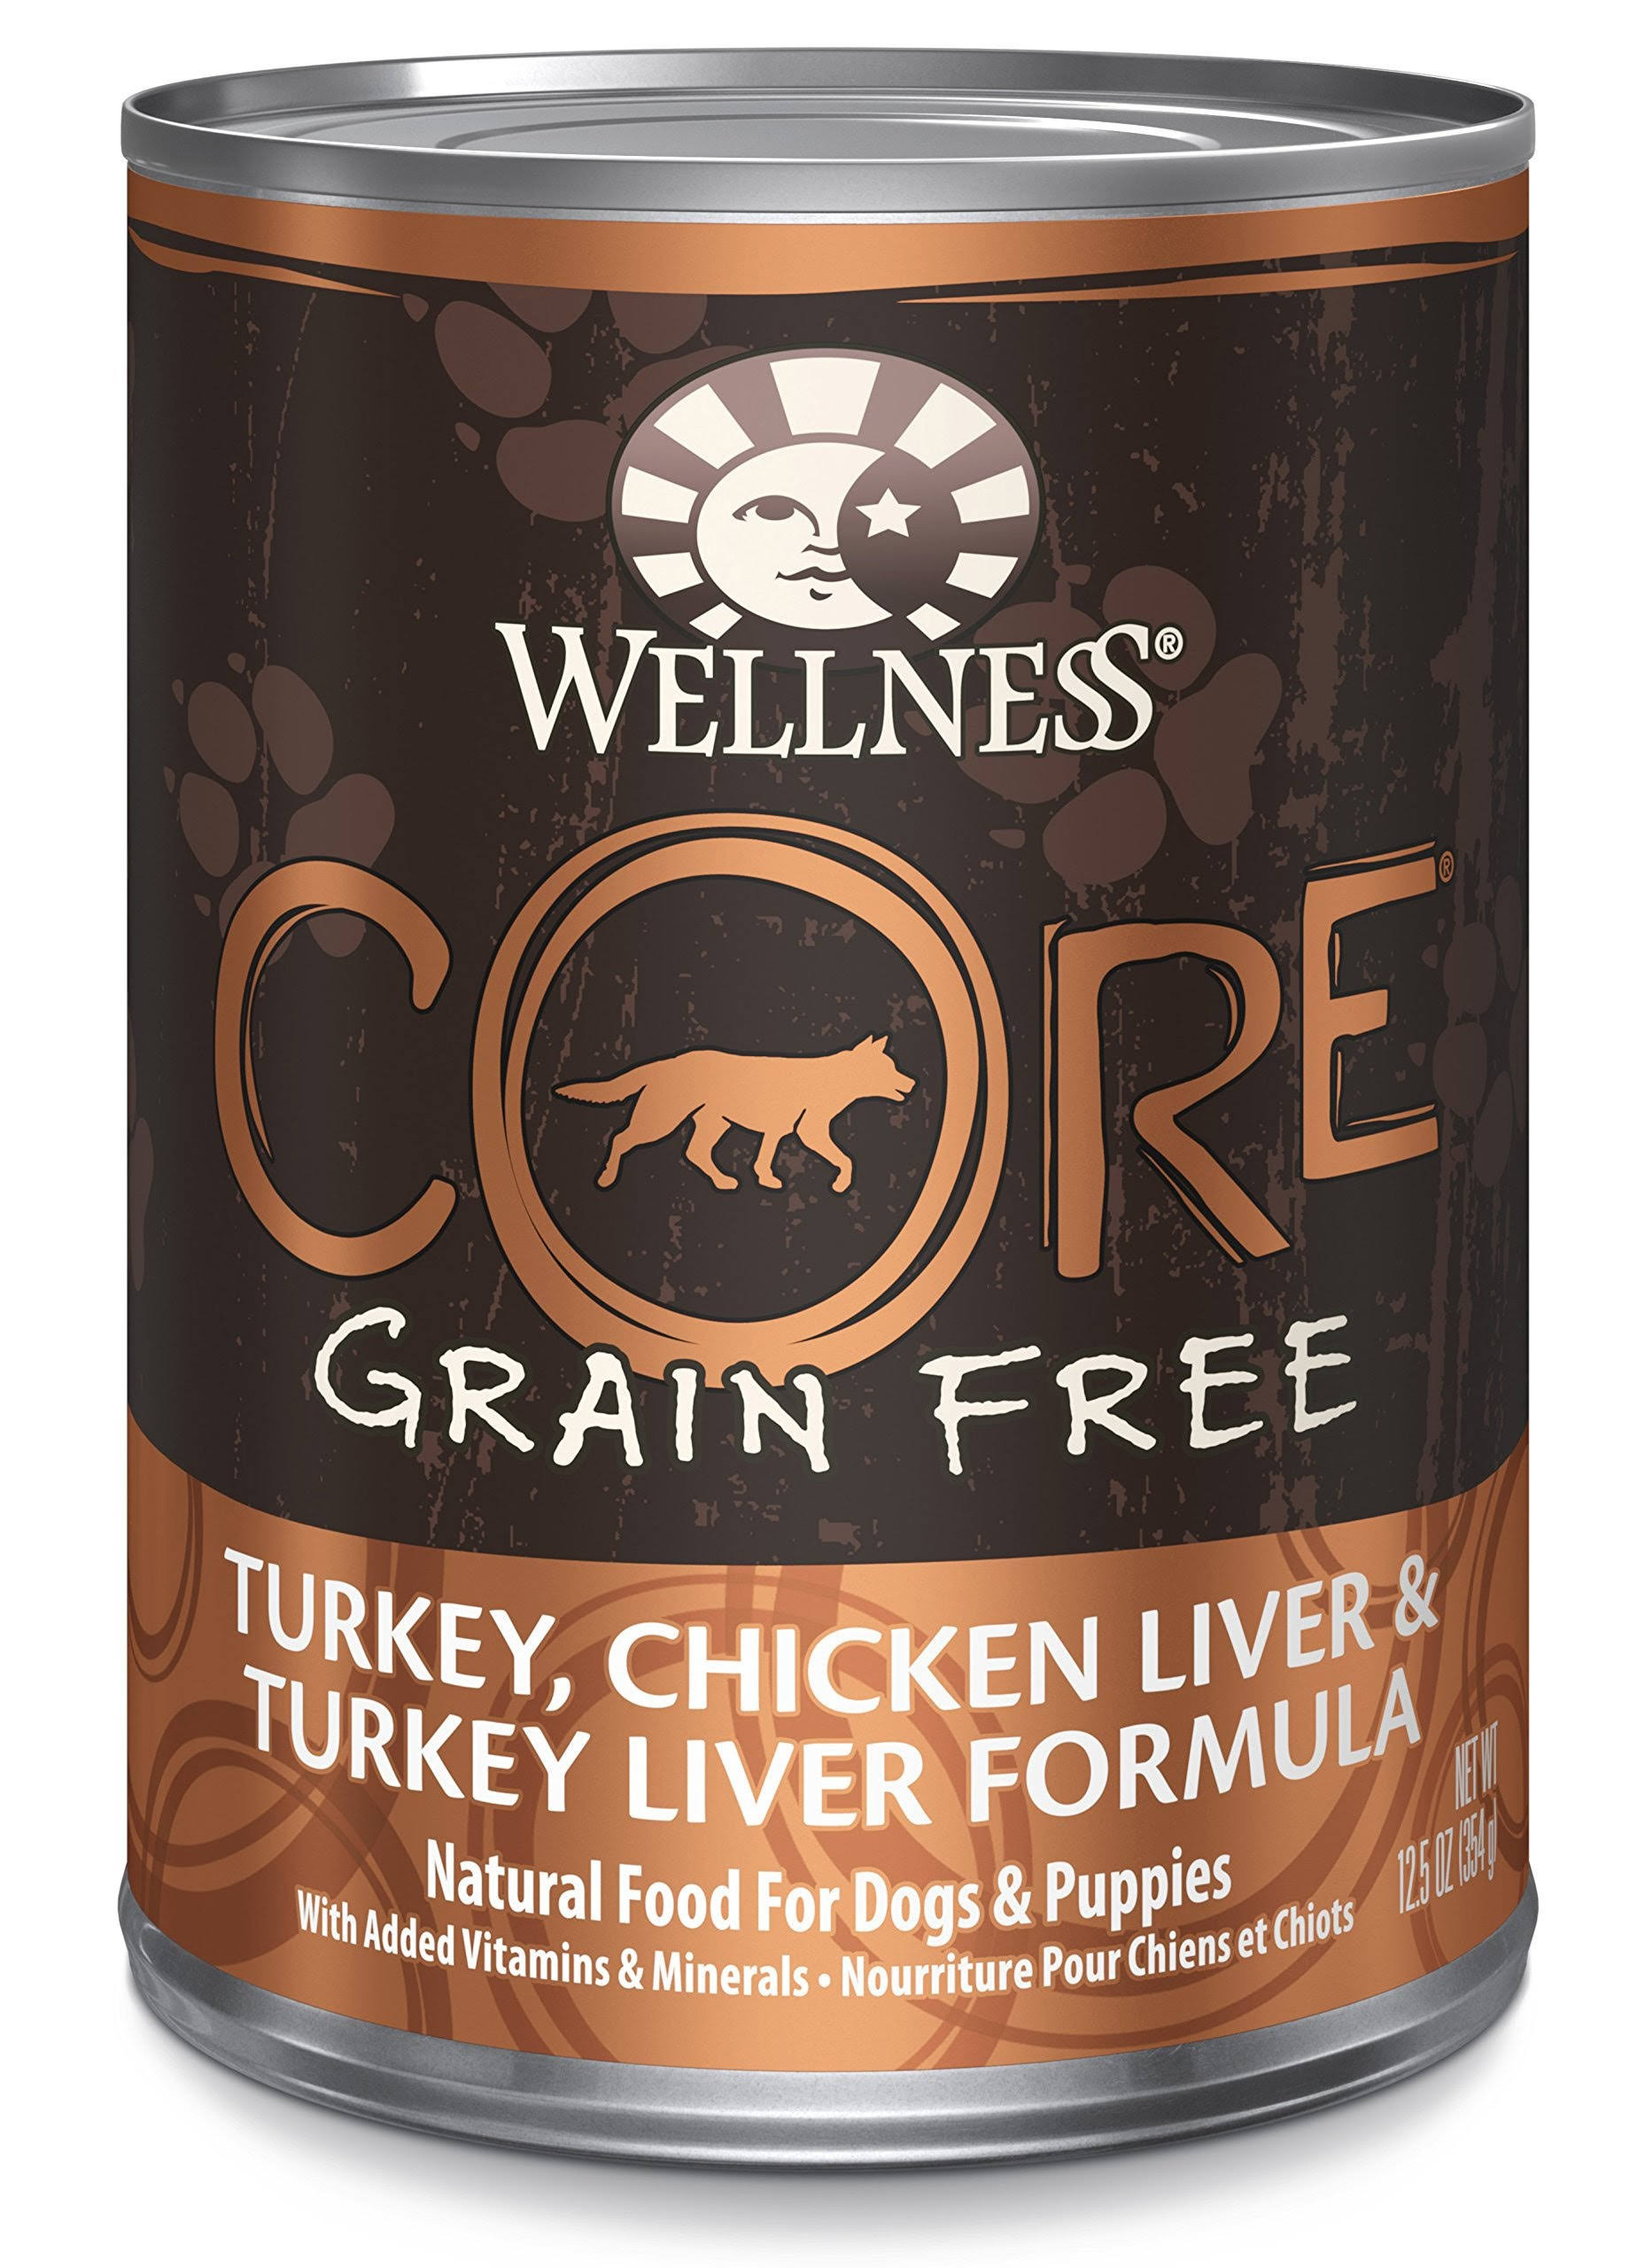 Wellness Core Natural Grain Free Wet Canned Dog Food - Turkey and Chicken, 12.5oz